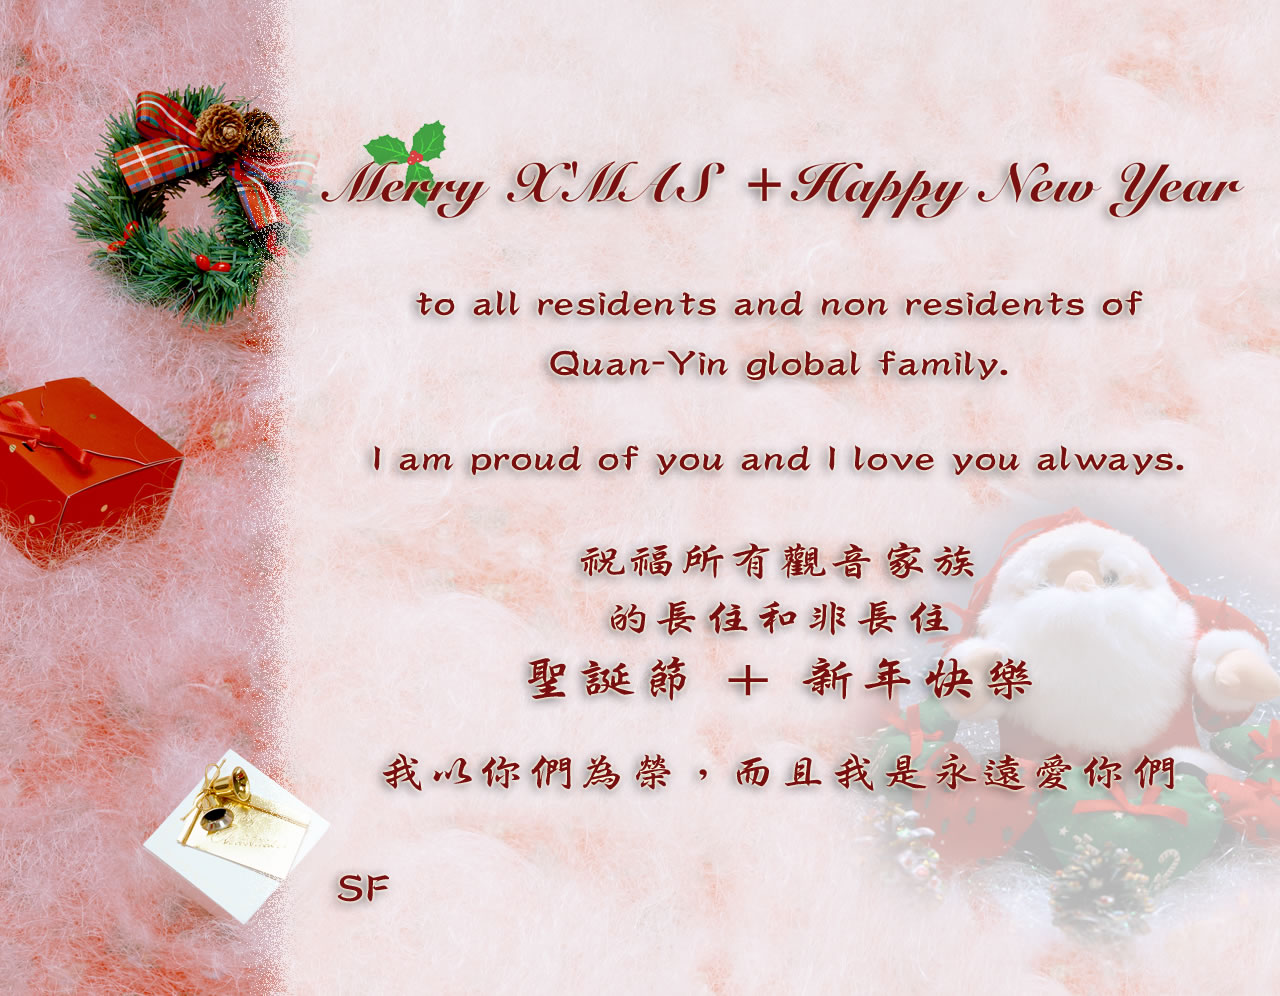 Merry X'MAS + Happy New Year to all residents and non residents of Quan-Yin global family. I am proud of you and I love you always. SF